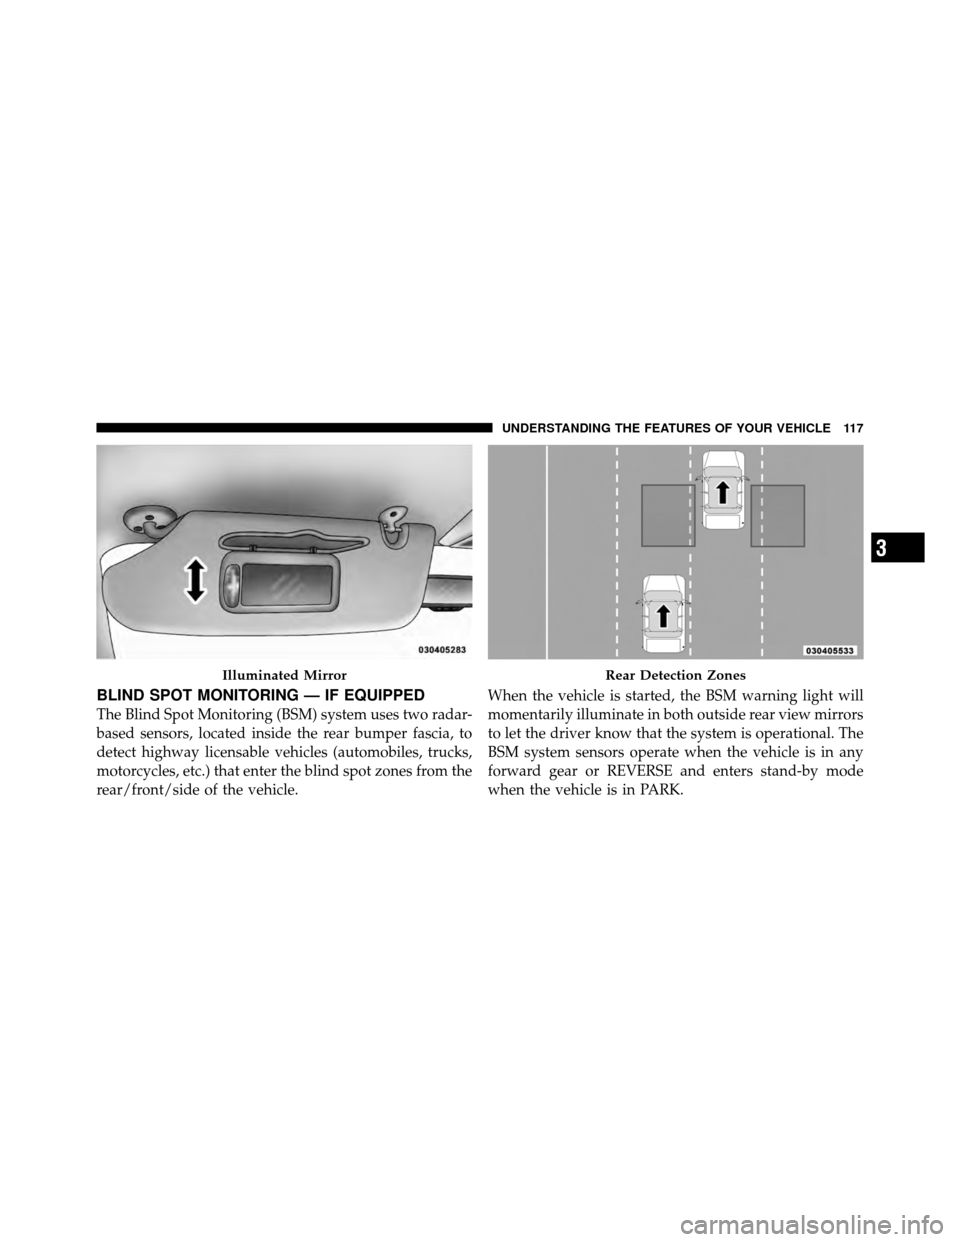 Ram Cargo Van 2012  Owners Manual BLIND SPOT MONITORING — IF EQUIPPED
The Blind Spot Monitoring (BSM) system uses two radar-
based sensors, located inside the rear bumper fascia, to
detect highway licensable vehicles (automobiles, t